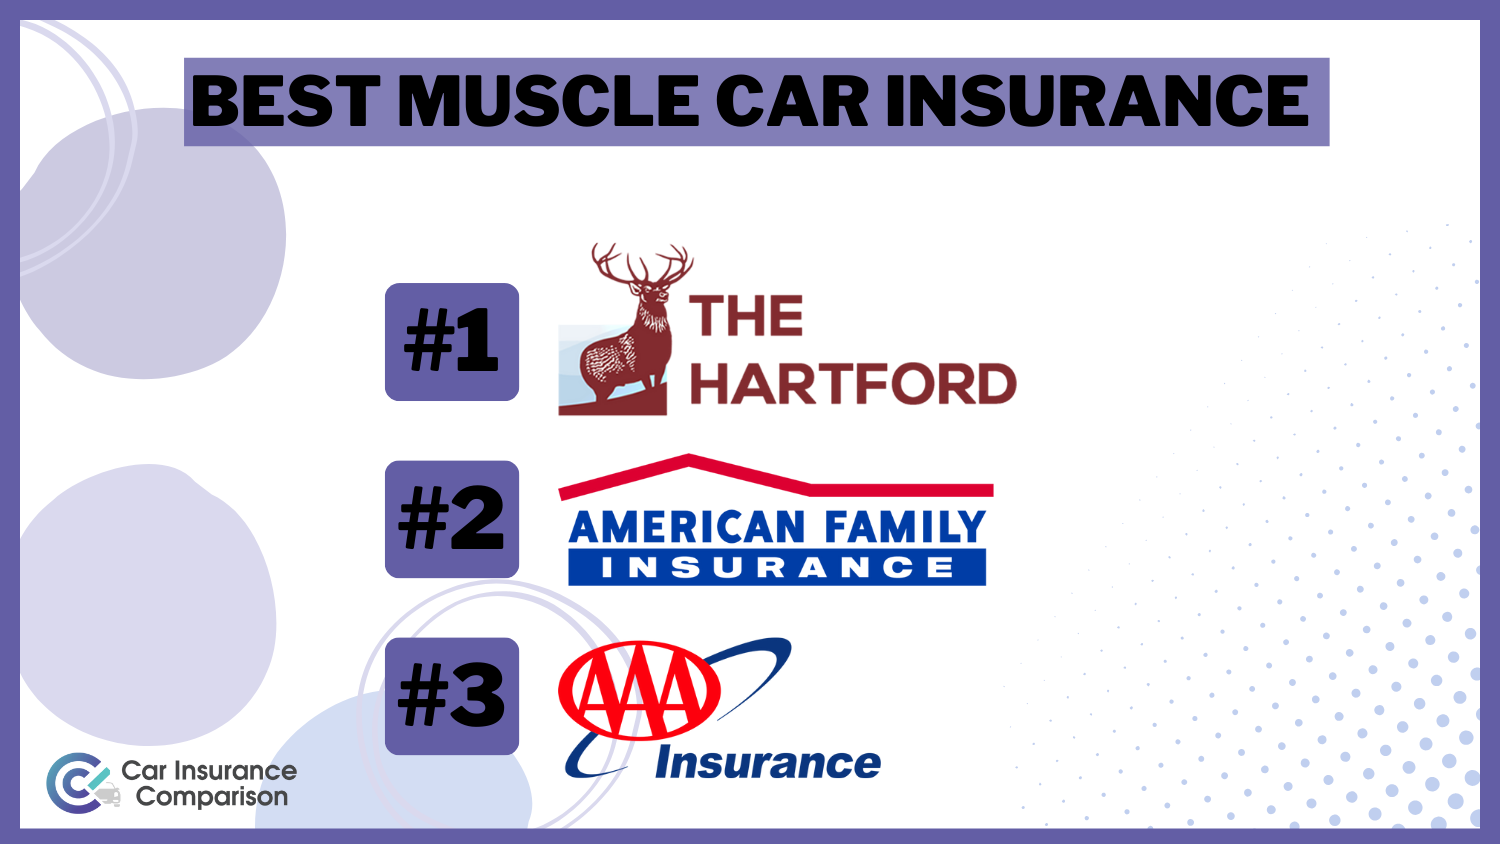 best muscle car insurance: The Hartford, American Family, AAA